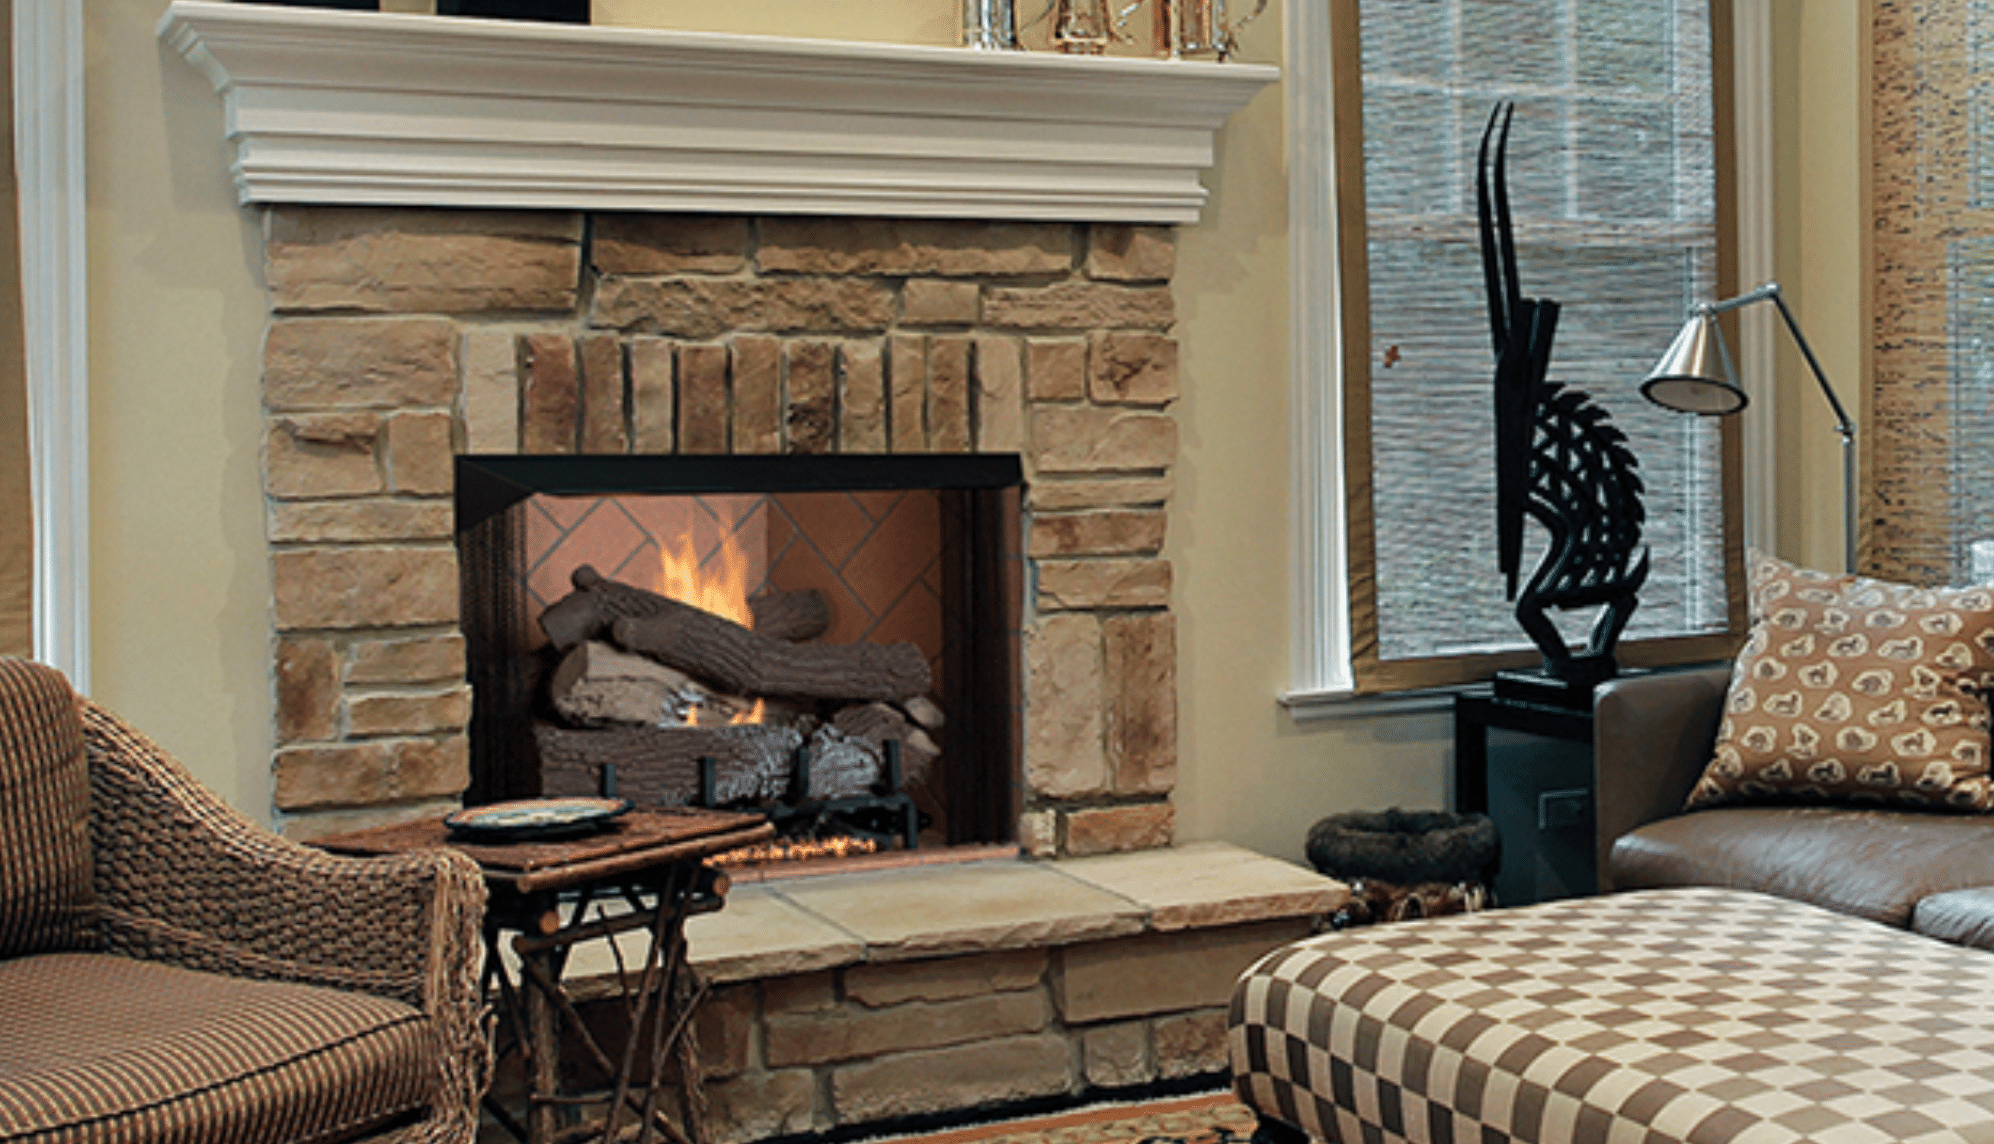 ventless fireplace with wooden logs on traditional stone mantle